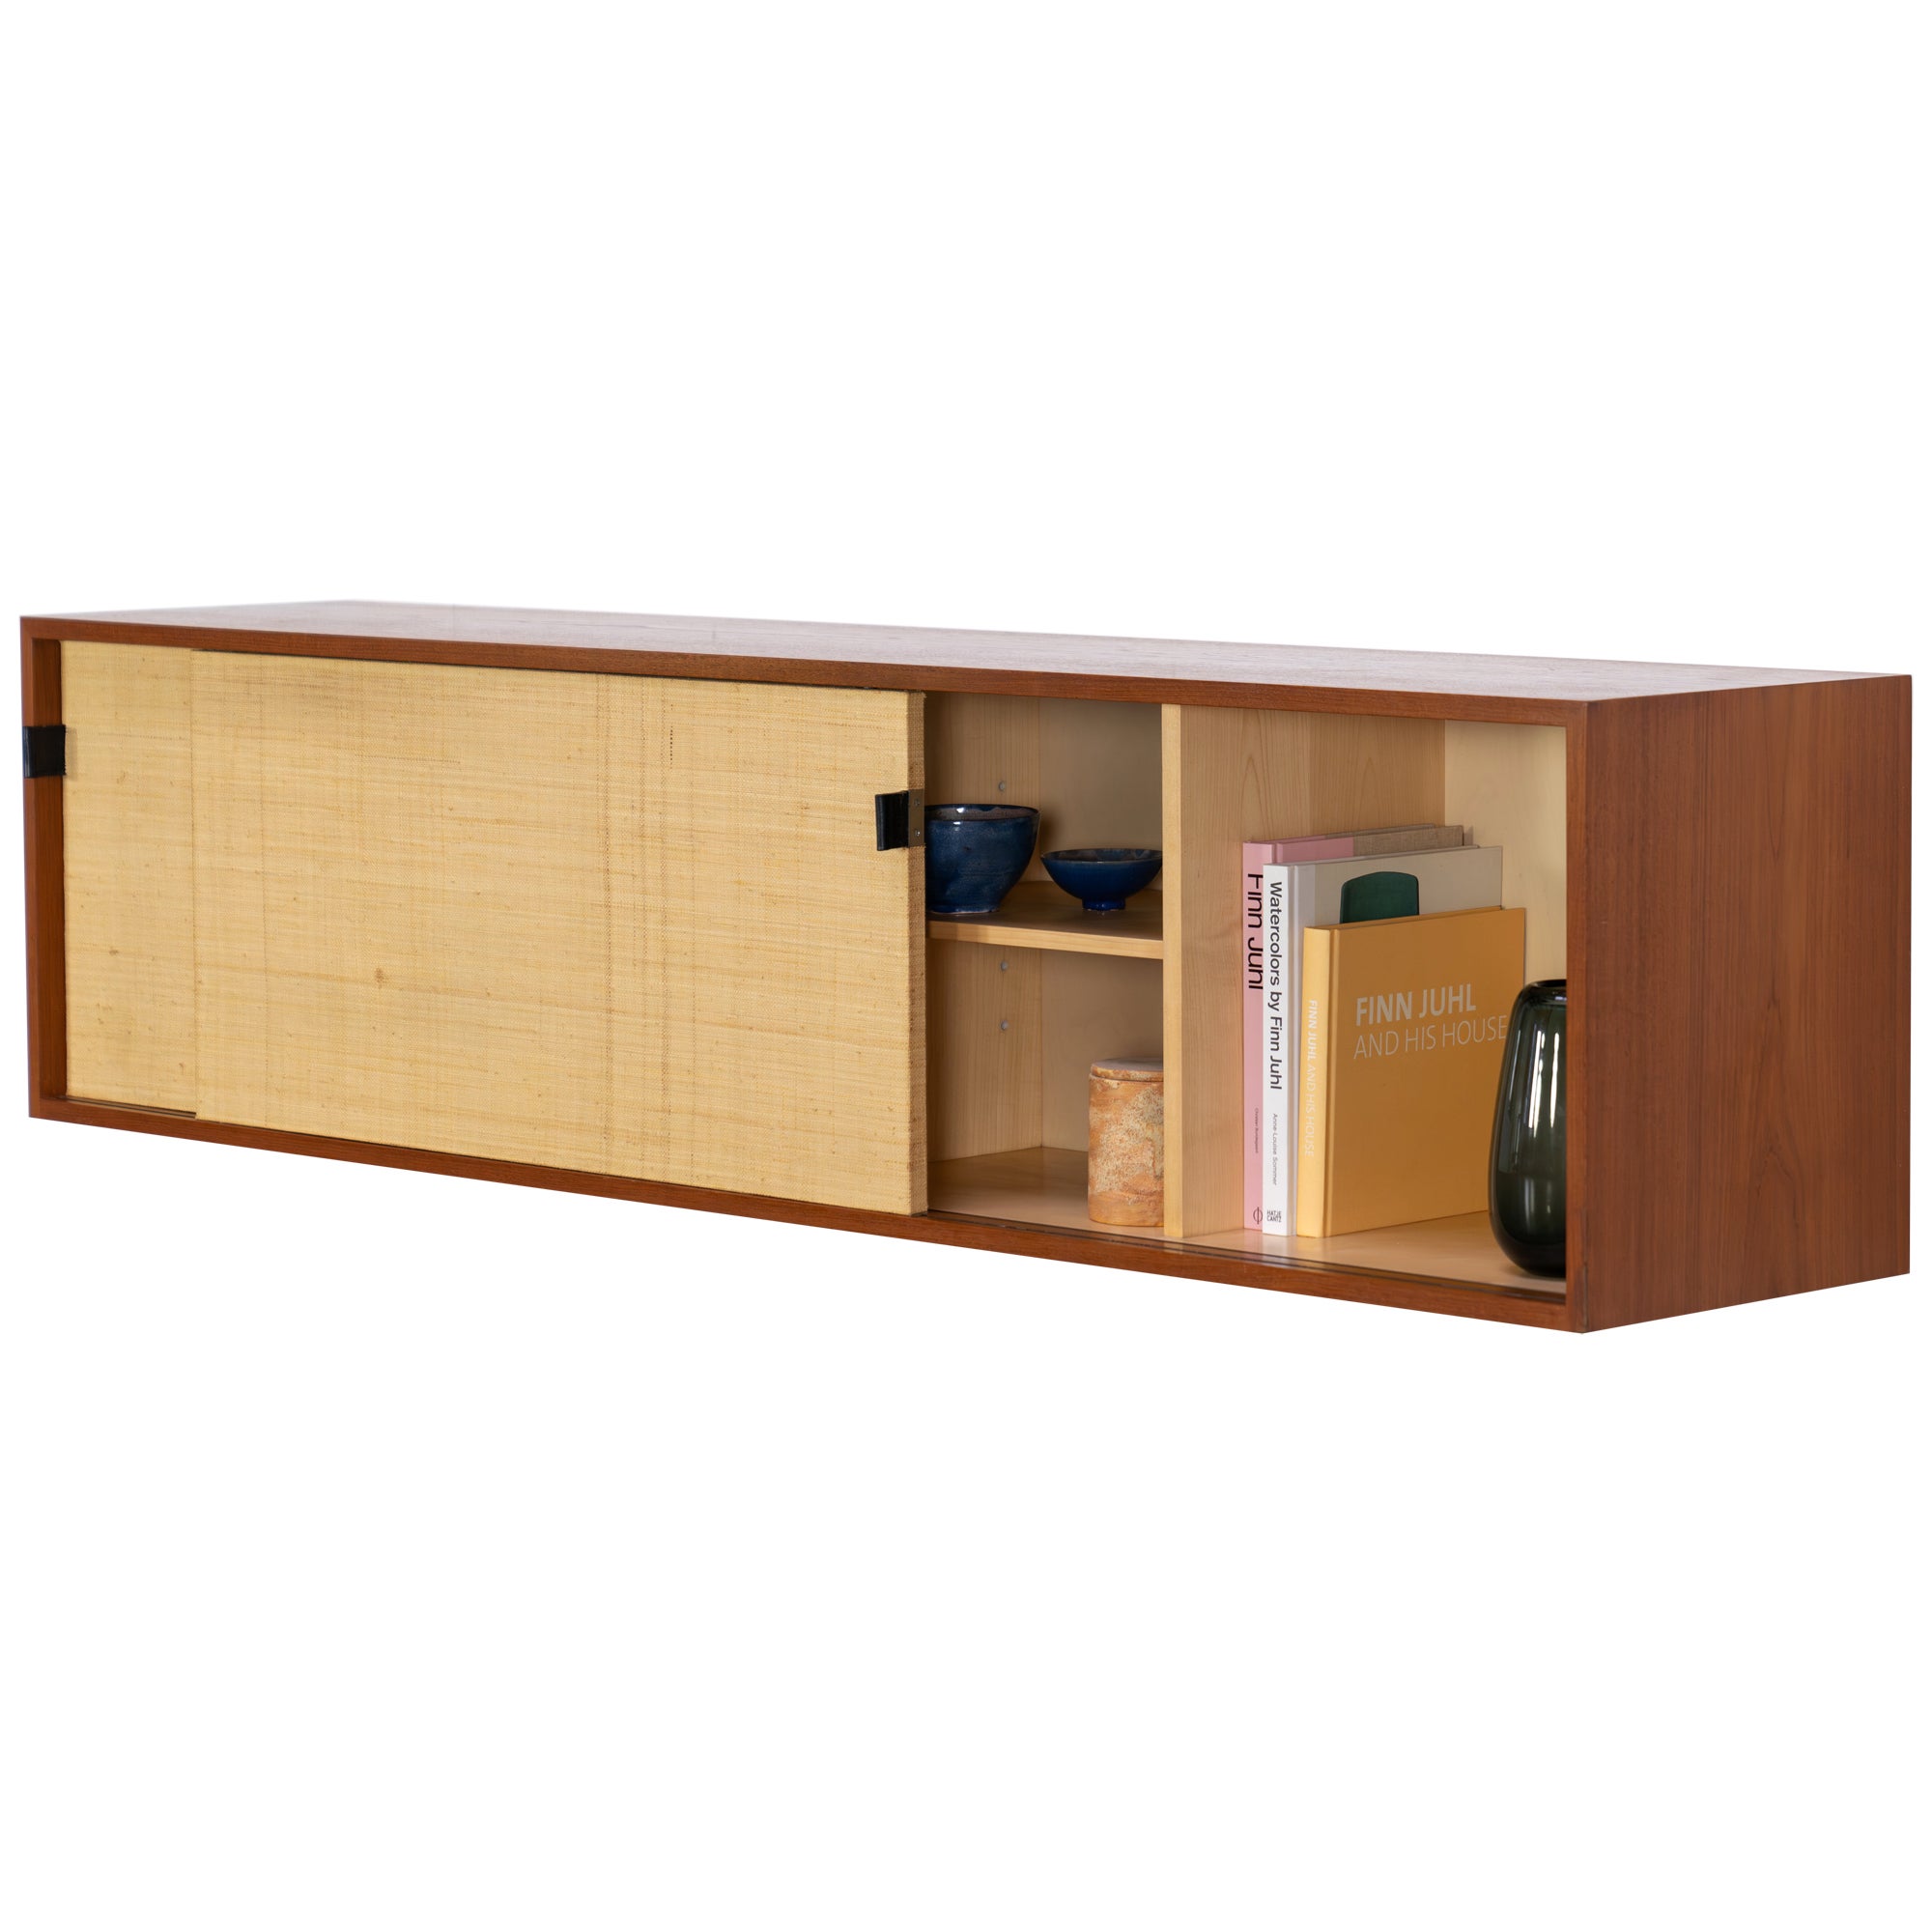 Florence Knoll Sideboard Wall Mounted 1952 Seagrass Teak by Knoll International For Sale